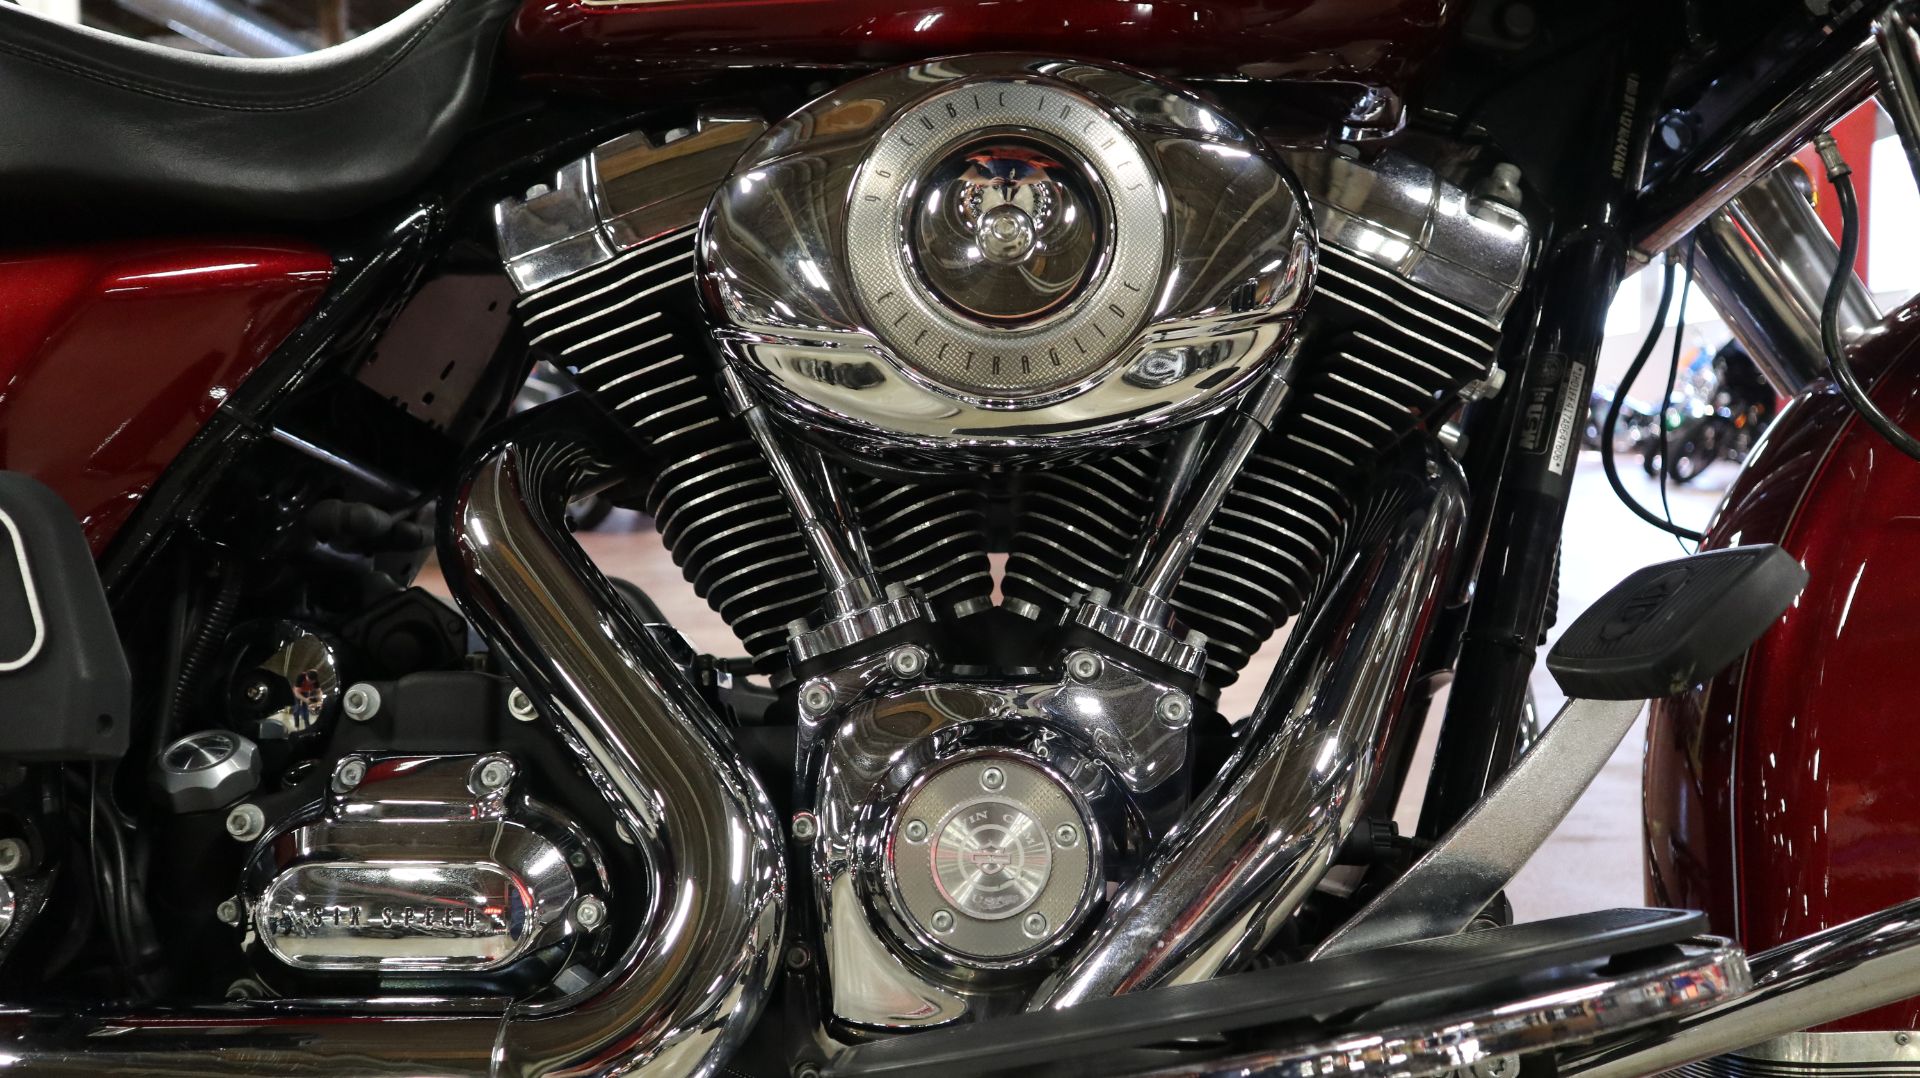 2010 Harley-Davidson Electra Glide® Classic in New London, Connecticut - Photo 16